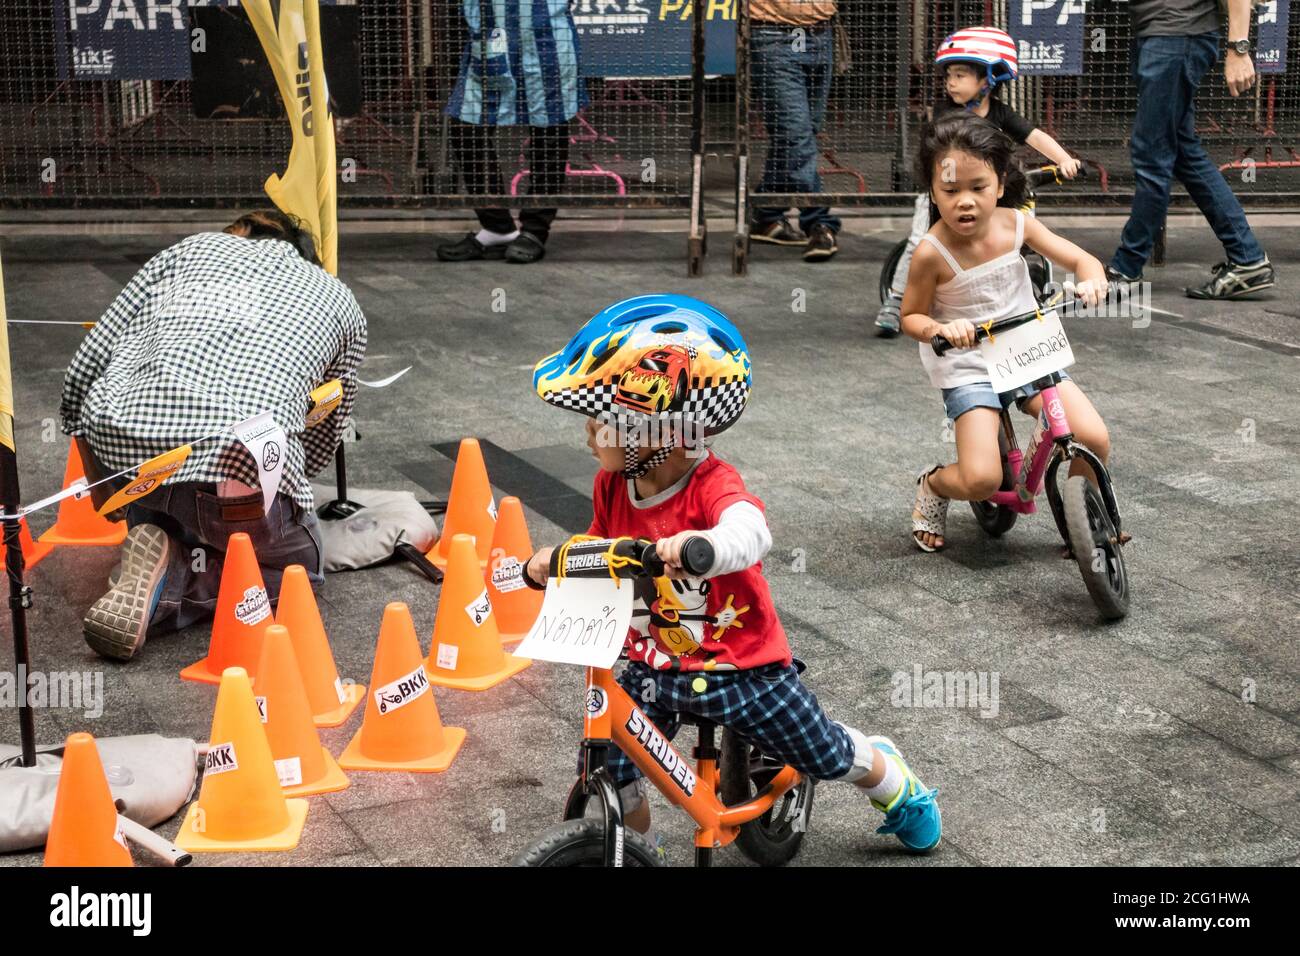 BANGKOK, THAILAND - JANUARY 14, 2016 : Children race bicycles on course. Stock Photo